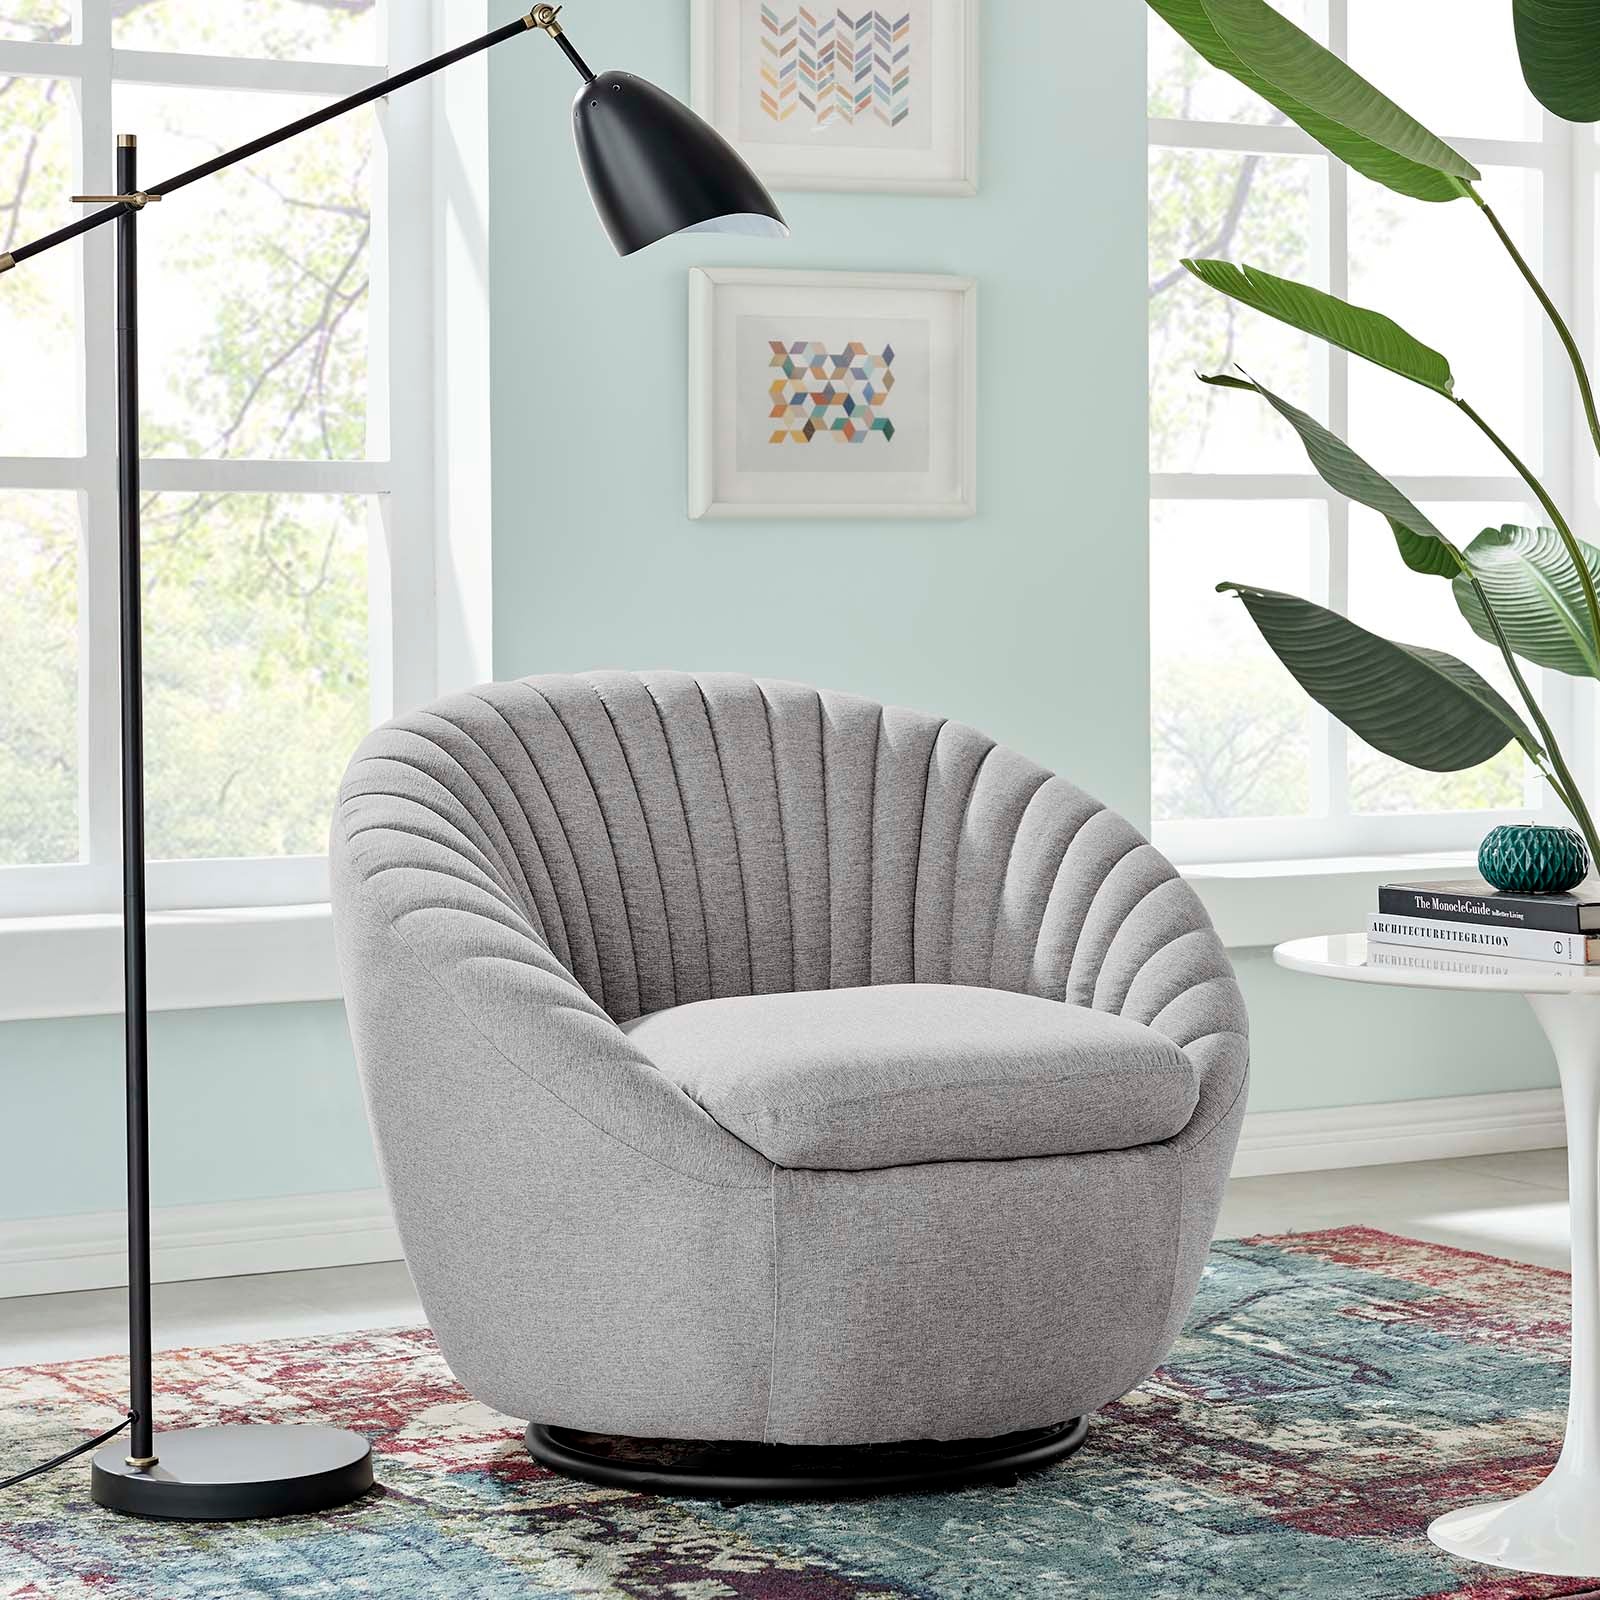 Whirr Tufted Fabric Fabric Swivel Chair - East Shore Modern Home Furnishings